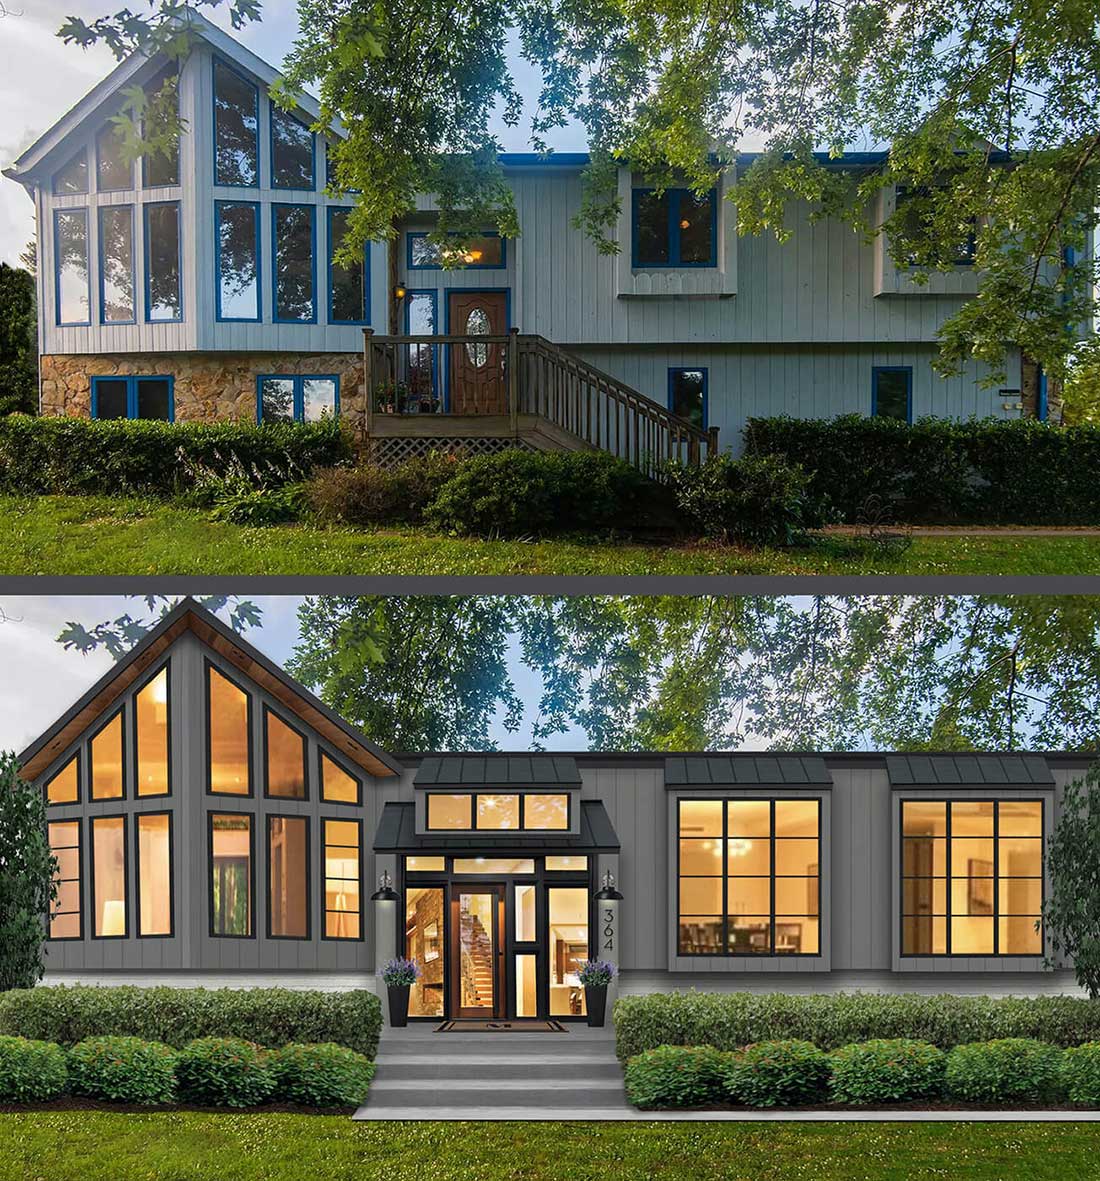 Before and after images of brick&batten home project including new windows and exterior features.